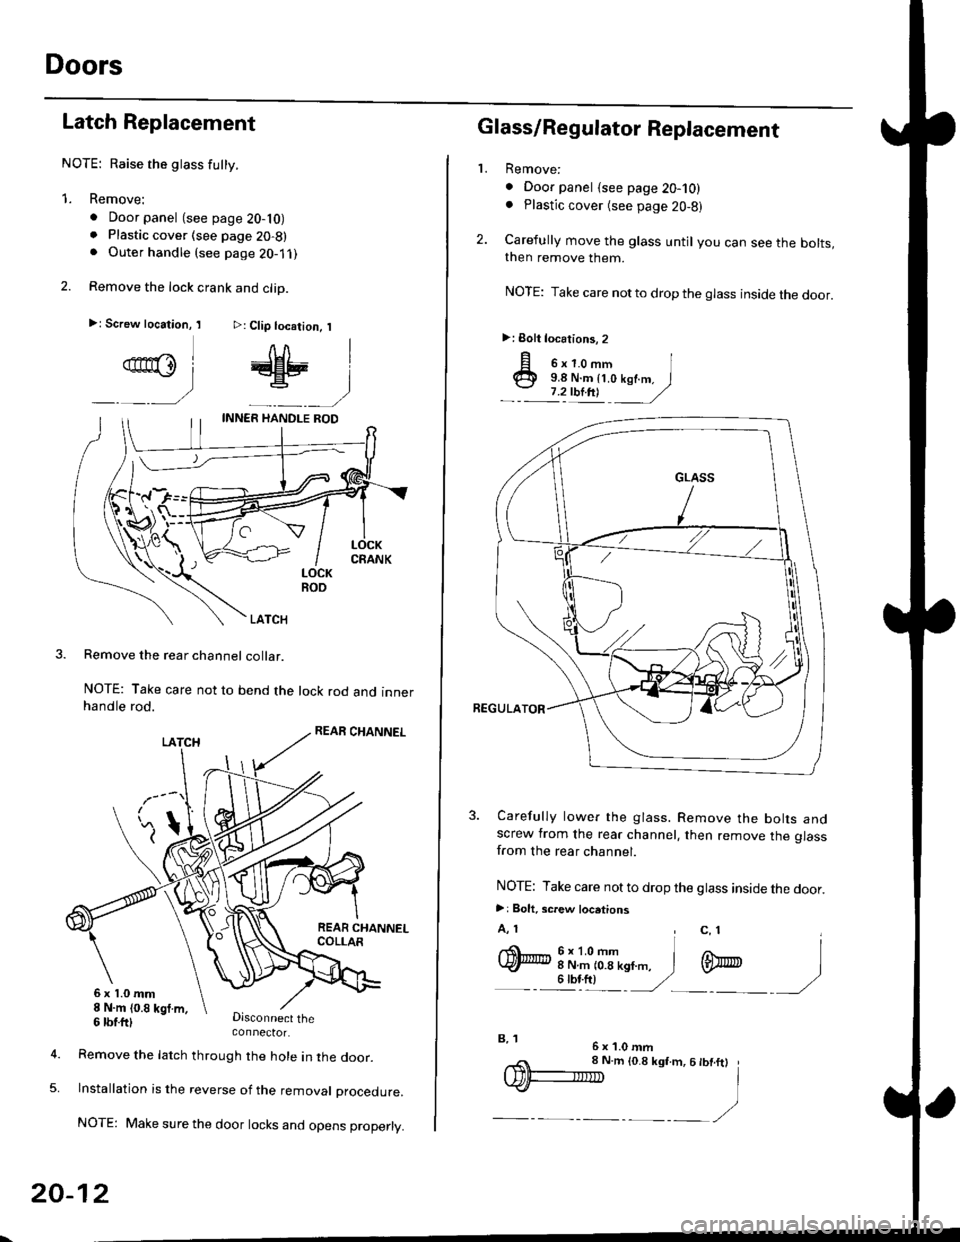 HONDA CIVIC 1996 6.G Workshop Manual Doors
Latch Replacement
NOTE: Raise the glass futty.
1. Remove:
. Door panel (see page 20-10). Plastic cover (see page 20-8). Outer handle (see page 2O-1 ,l
2. Remove the lock crank and clip.
>: Screw